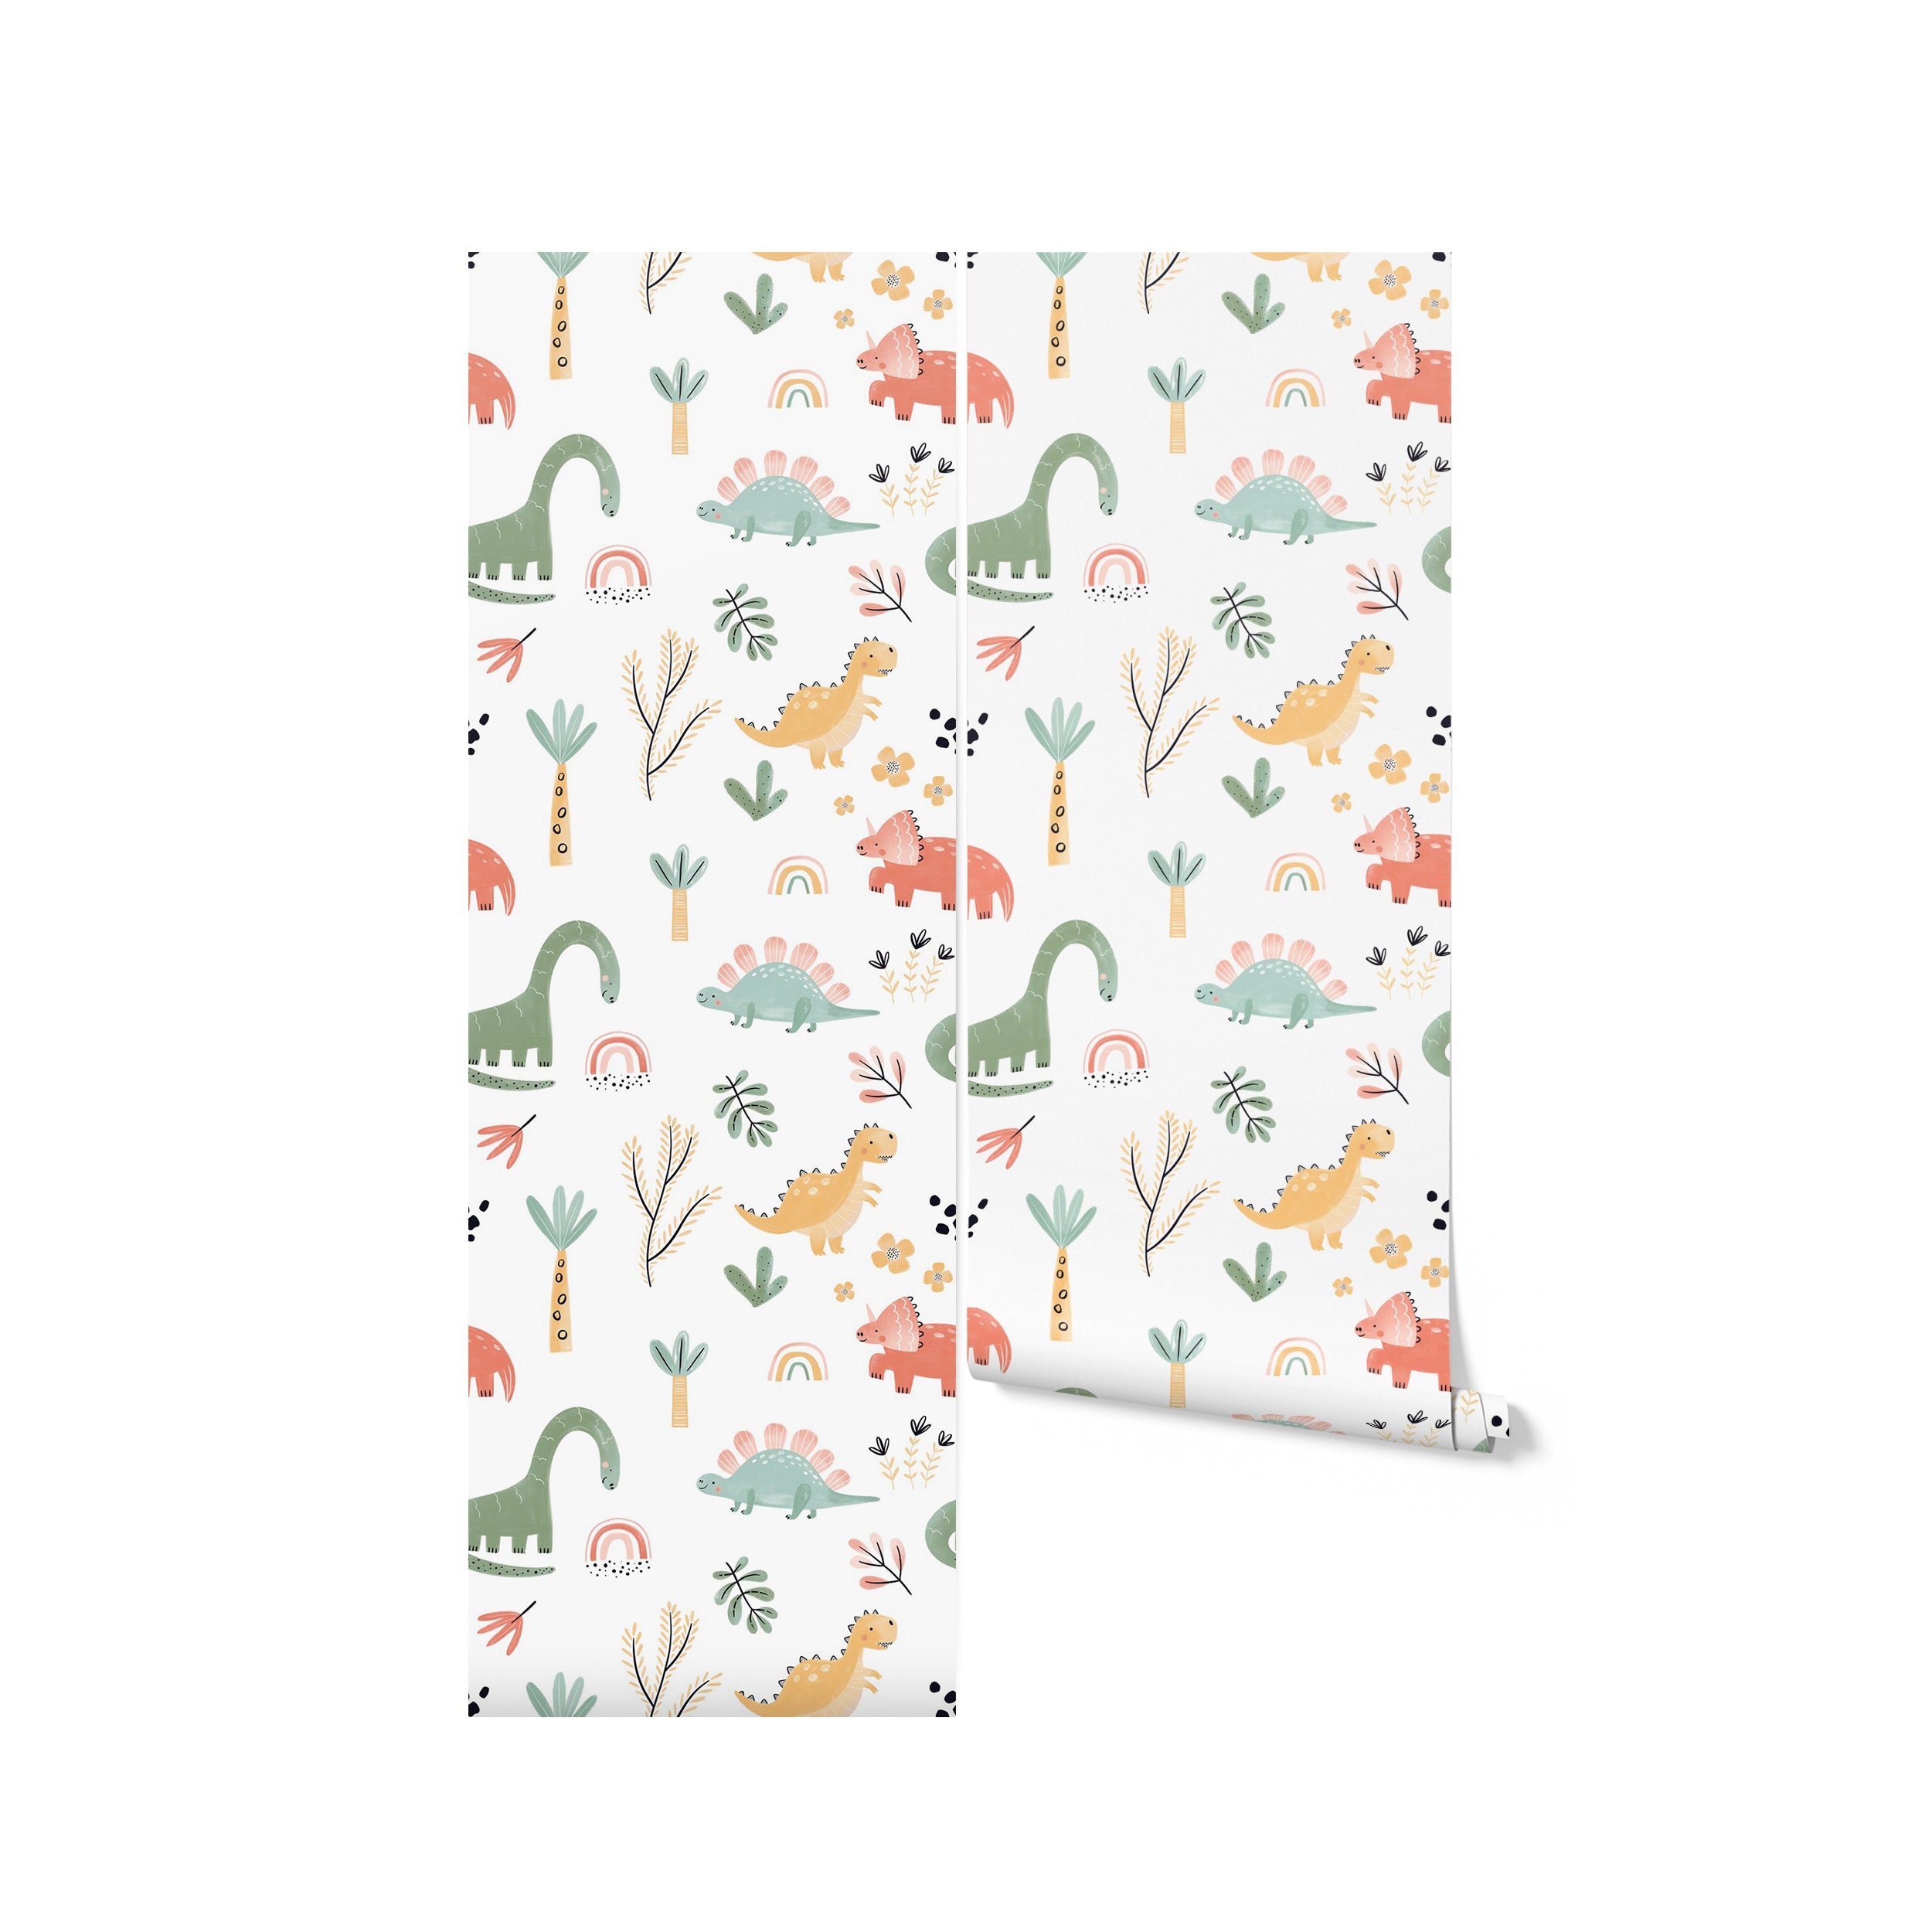 A roll of Dinosaur Nursery Wallpaper featuring an adorable array of dinosaurs in muted colors amidst a pattern of plants and rainbows, offering a sweet and adventurous touch to any child's bedroom or play space.